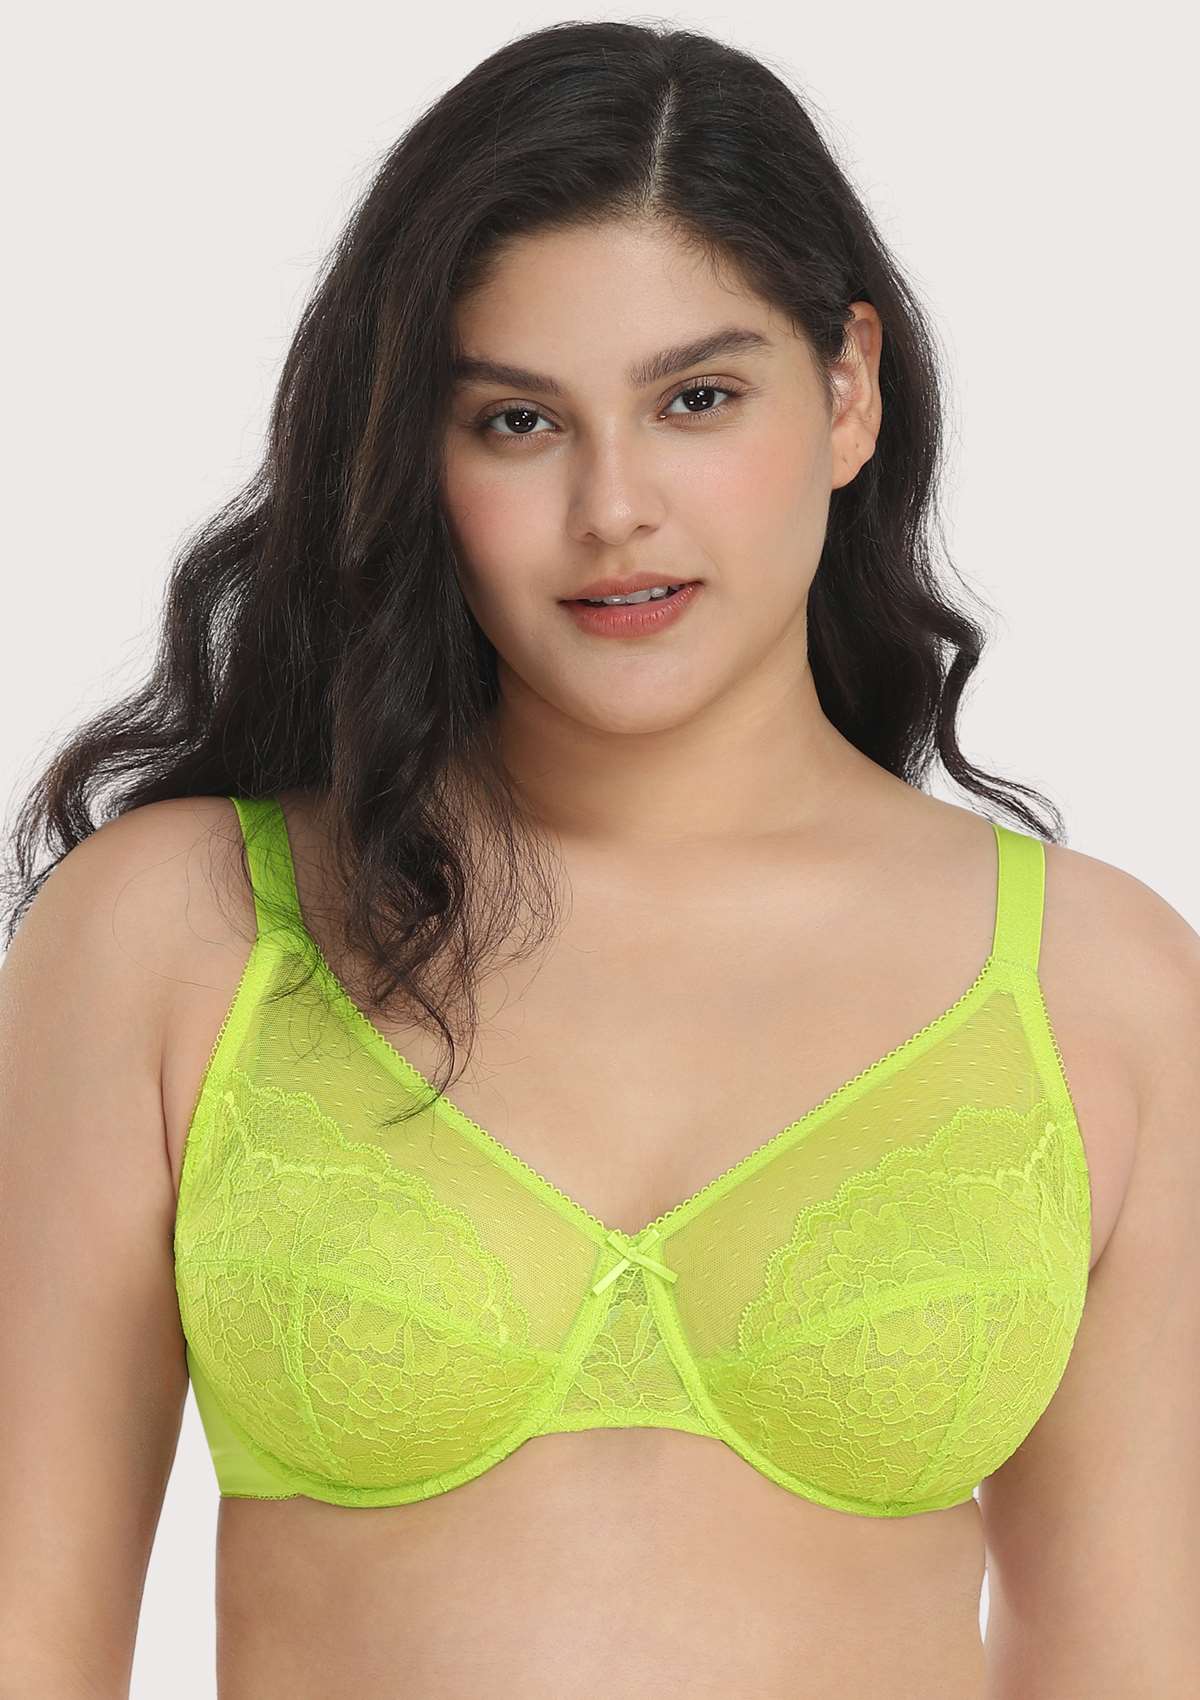 HSIA Enchante Full Cup Minimizing Bra: Supportive Unlined Lace Bra - Lime Green / 36 / C